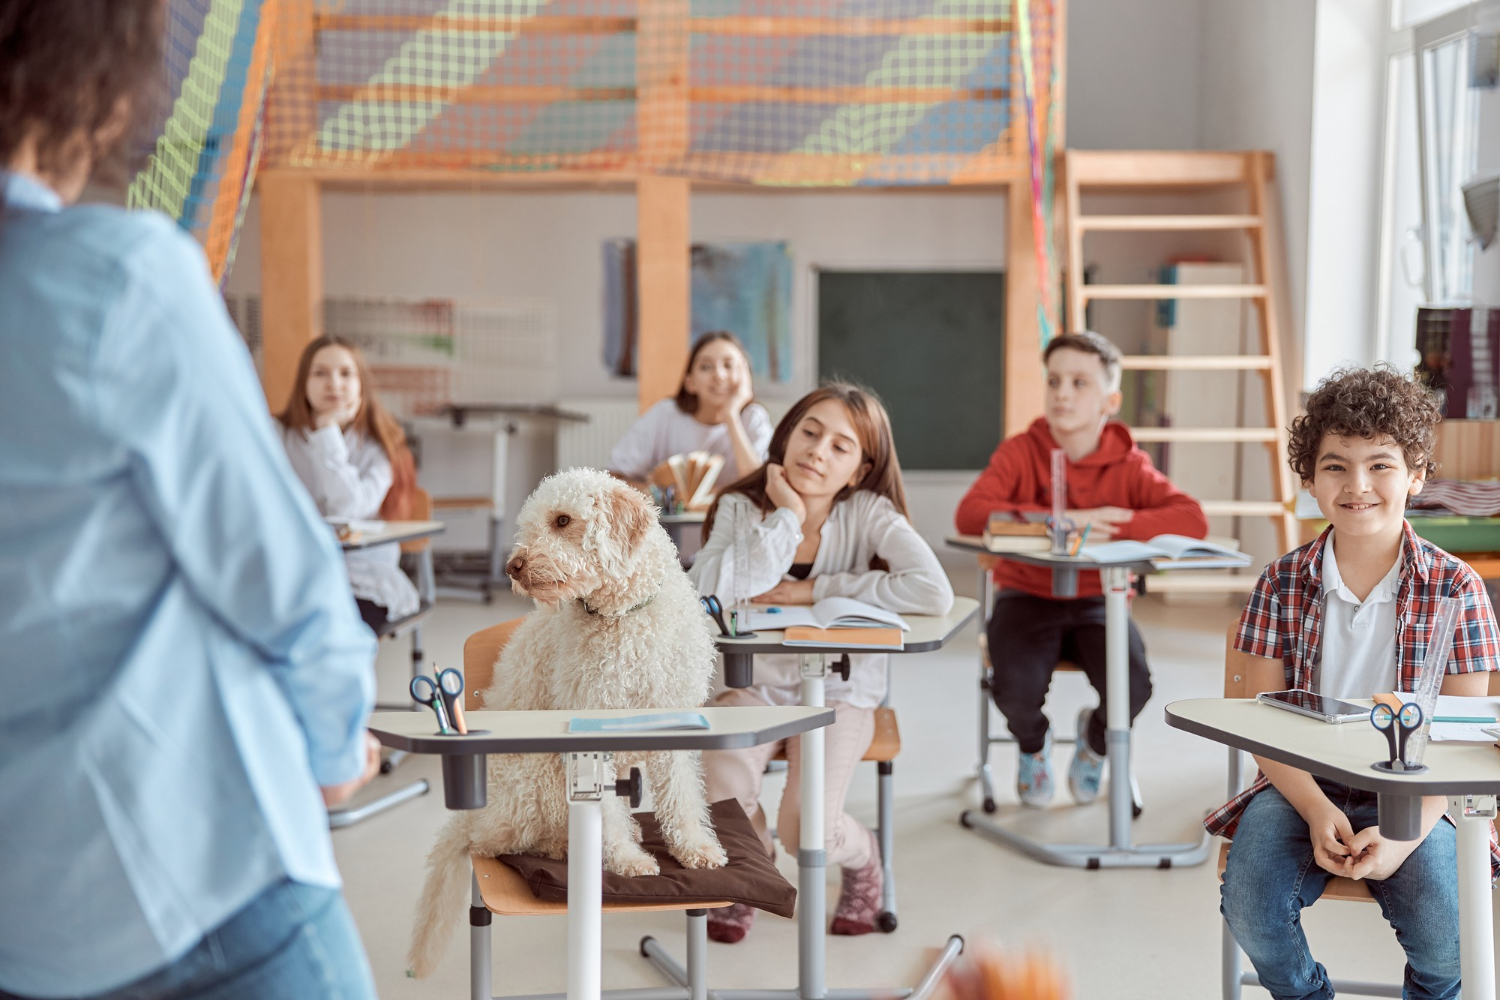 Kids with Dogs in Classroom